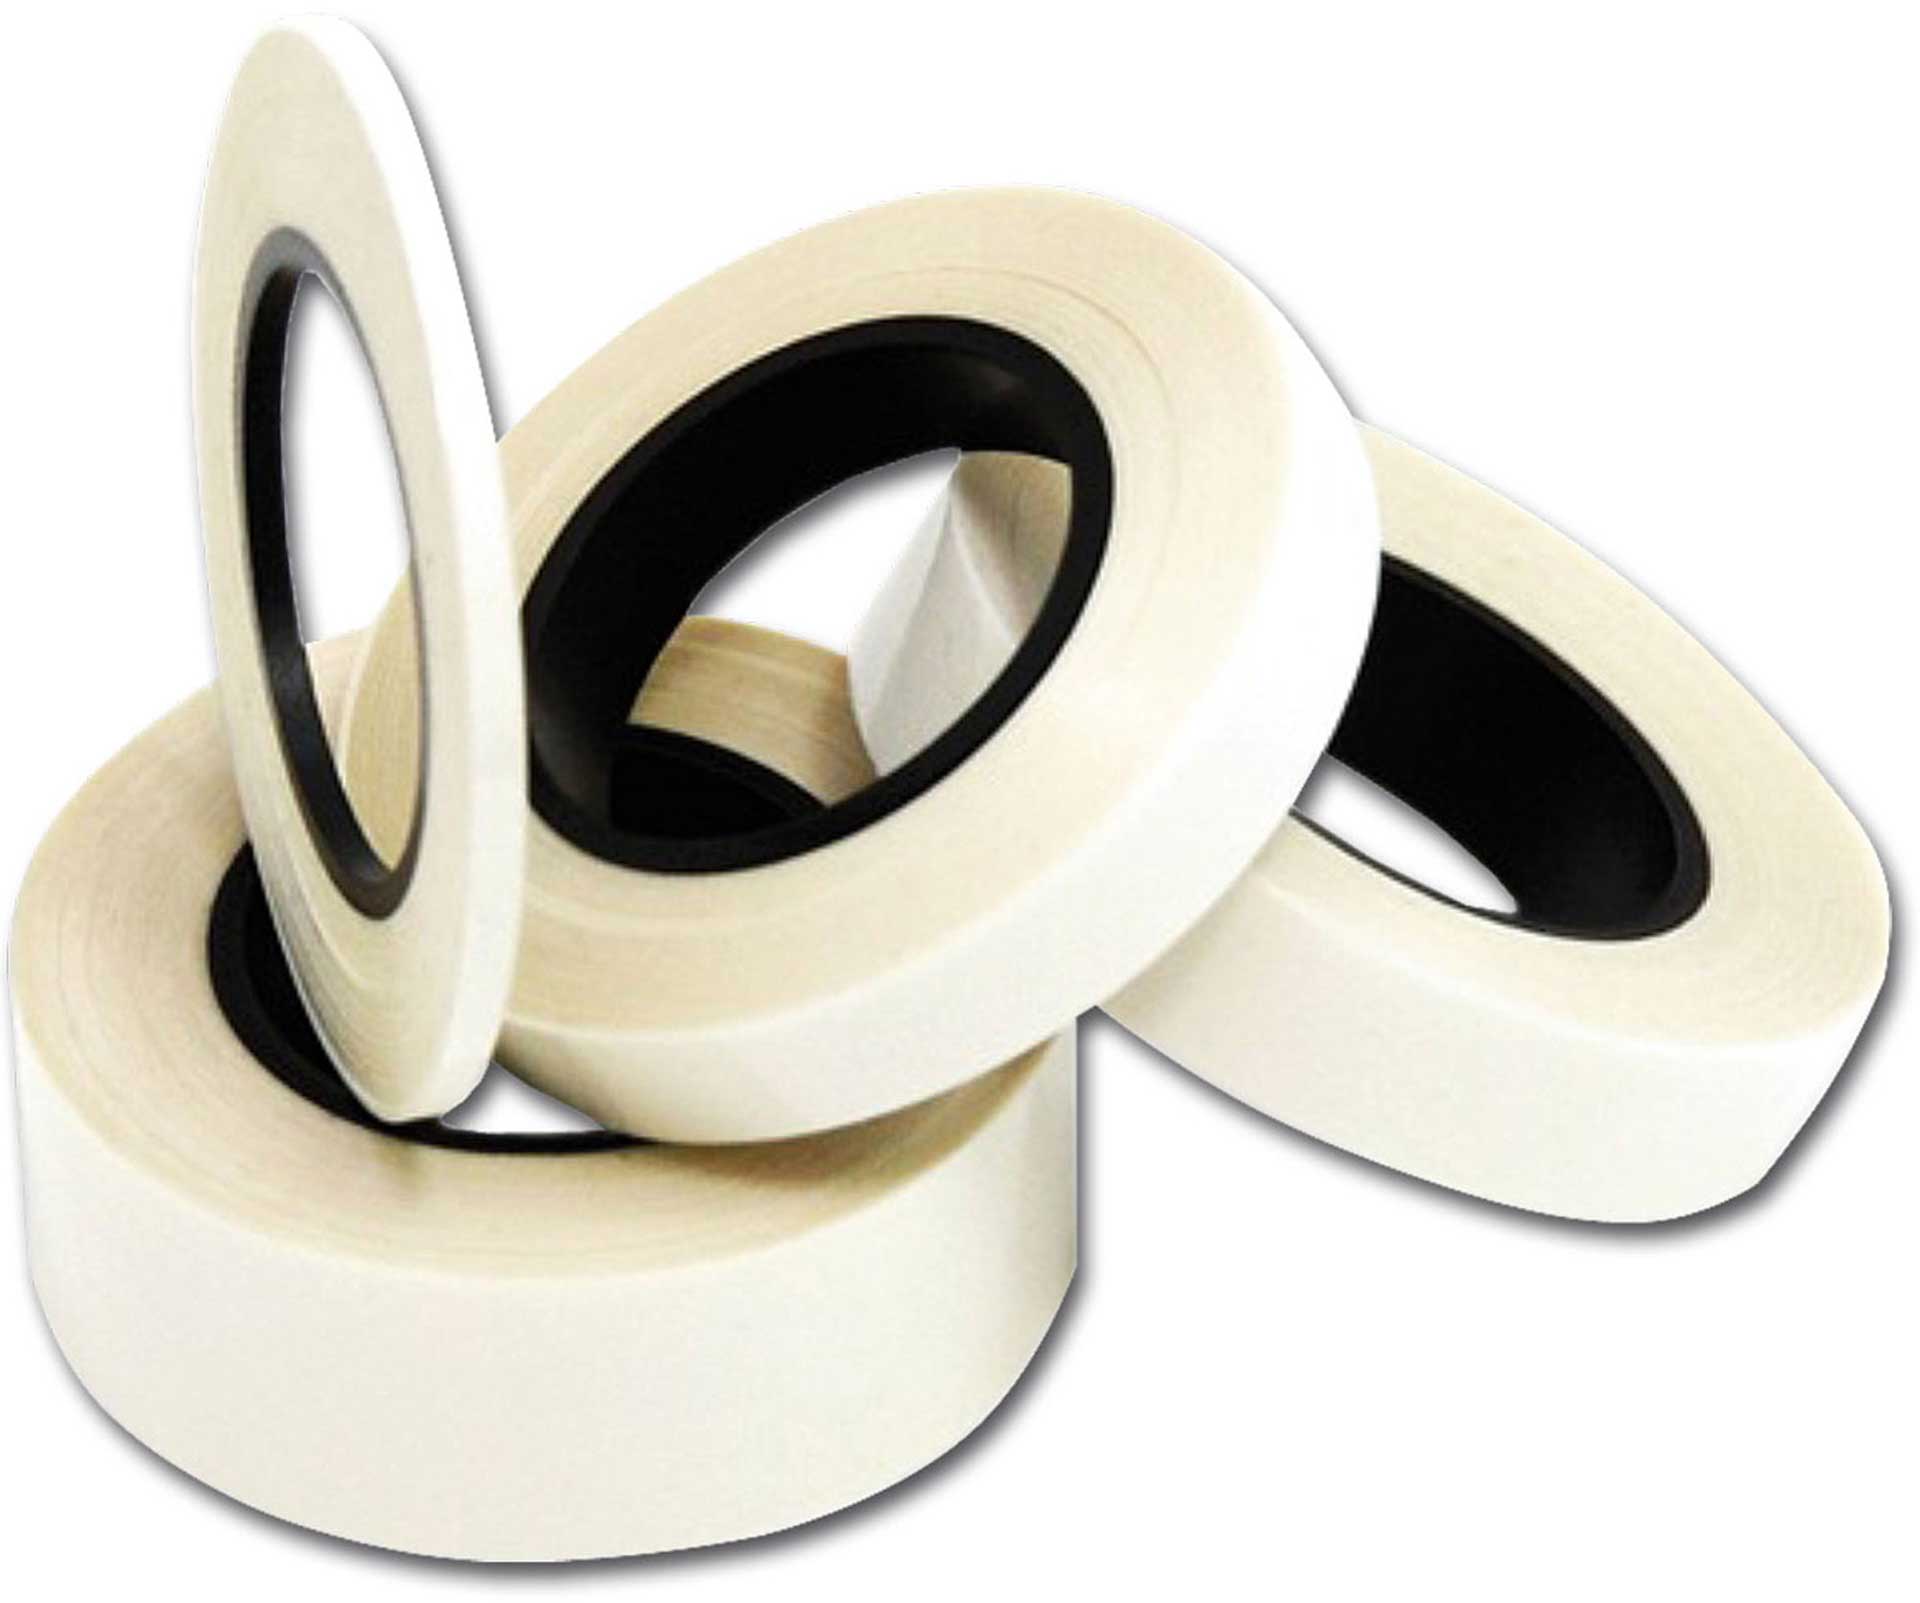 ORACOVER ORAL MASKING TAPE 5MM/15LFM ROLL #00